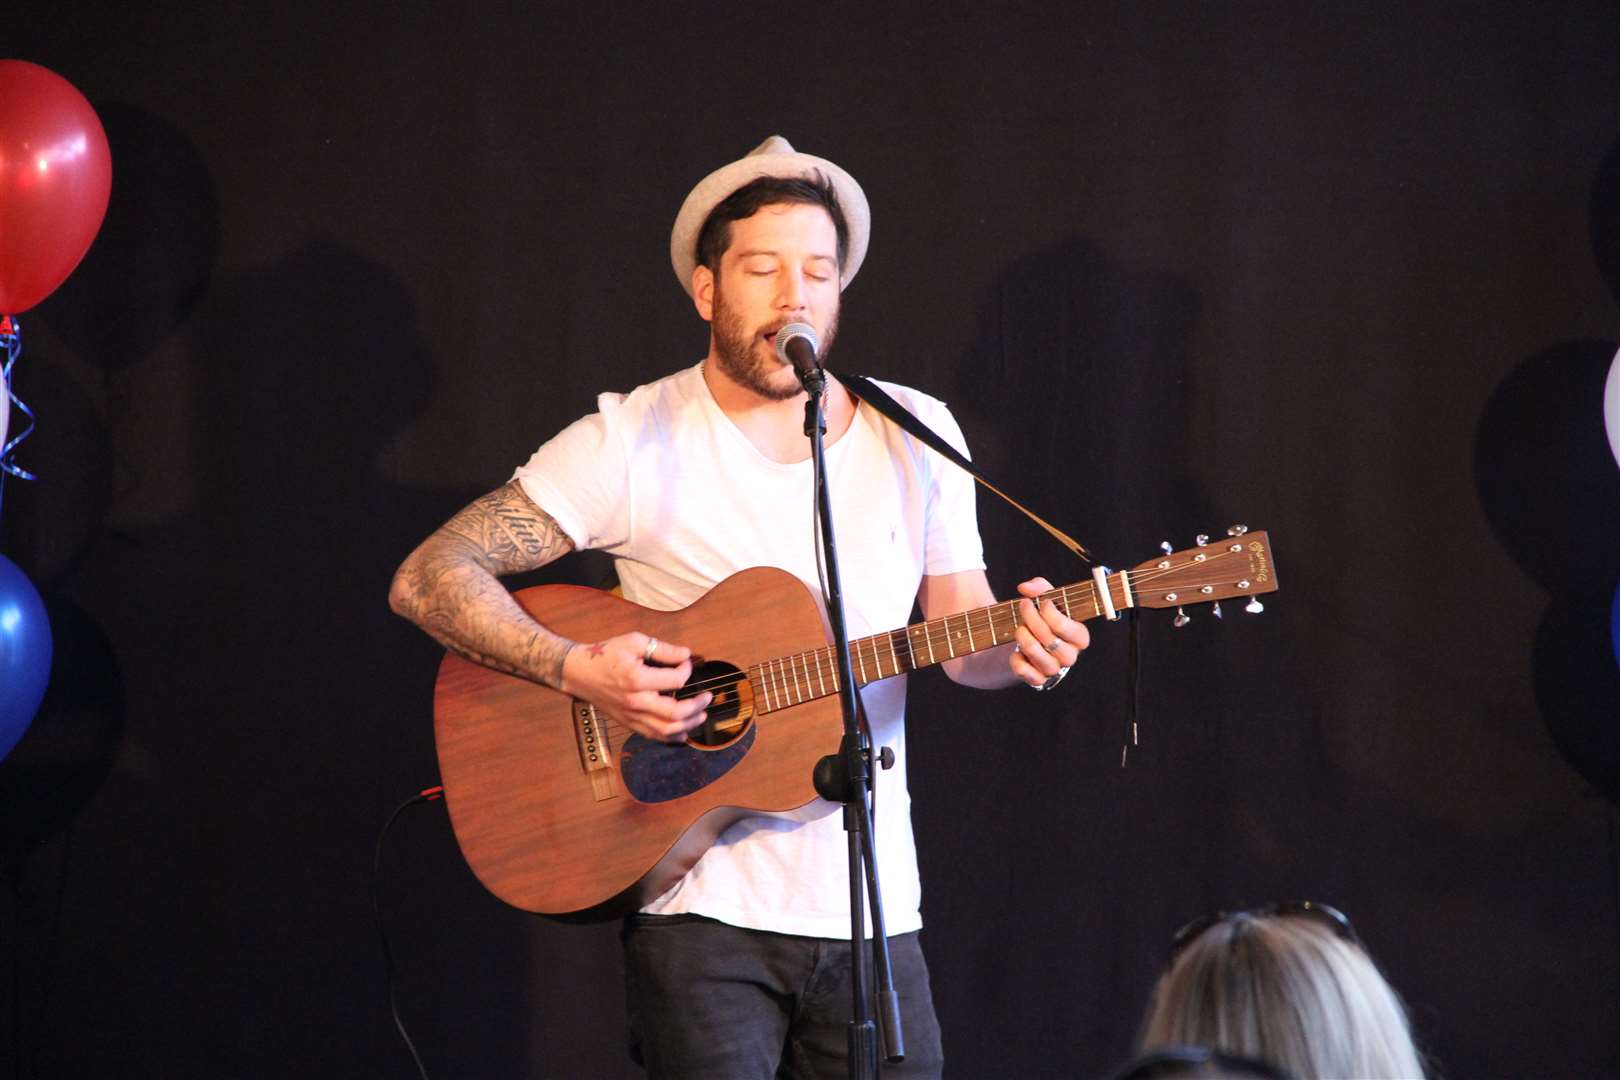 Singer Matt Cardle at the launch of Orchard Theatre's summer season.